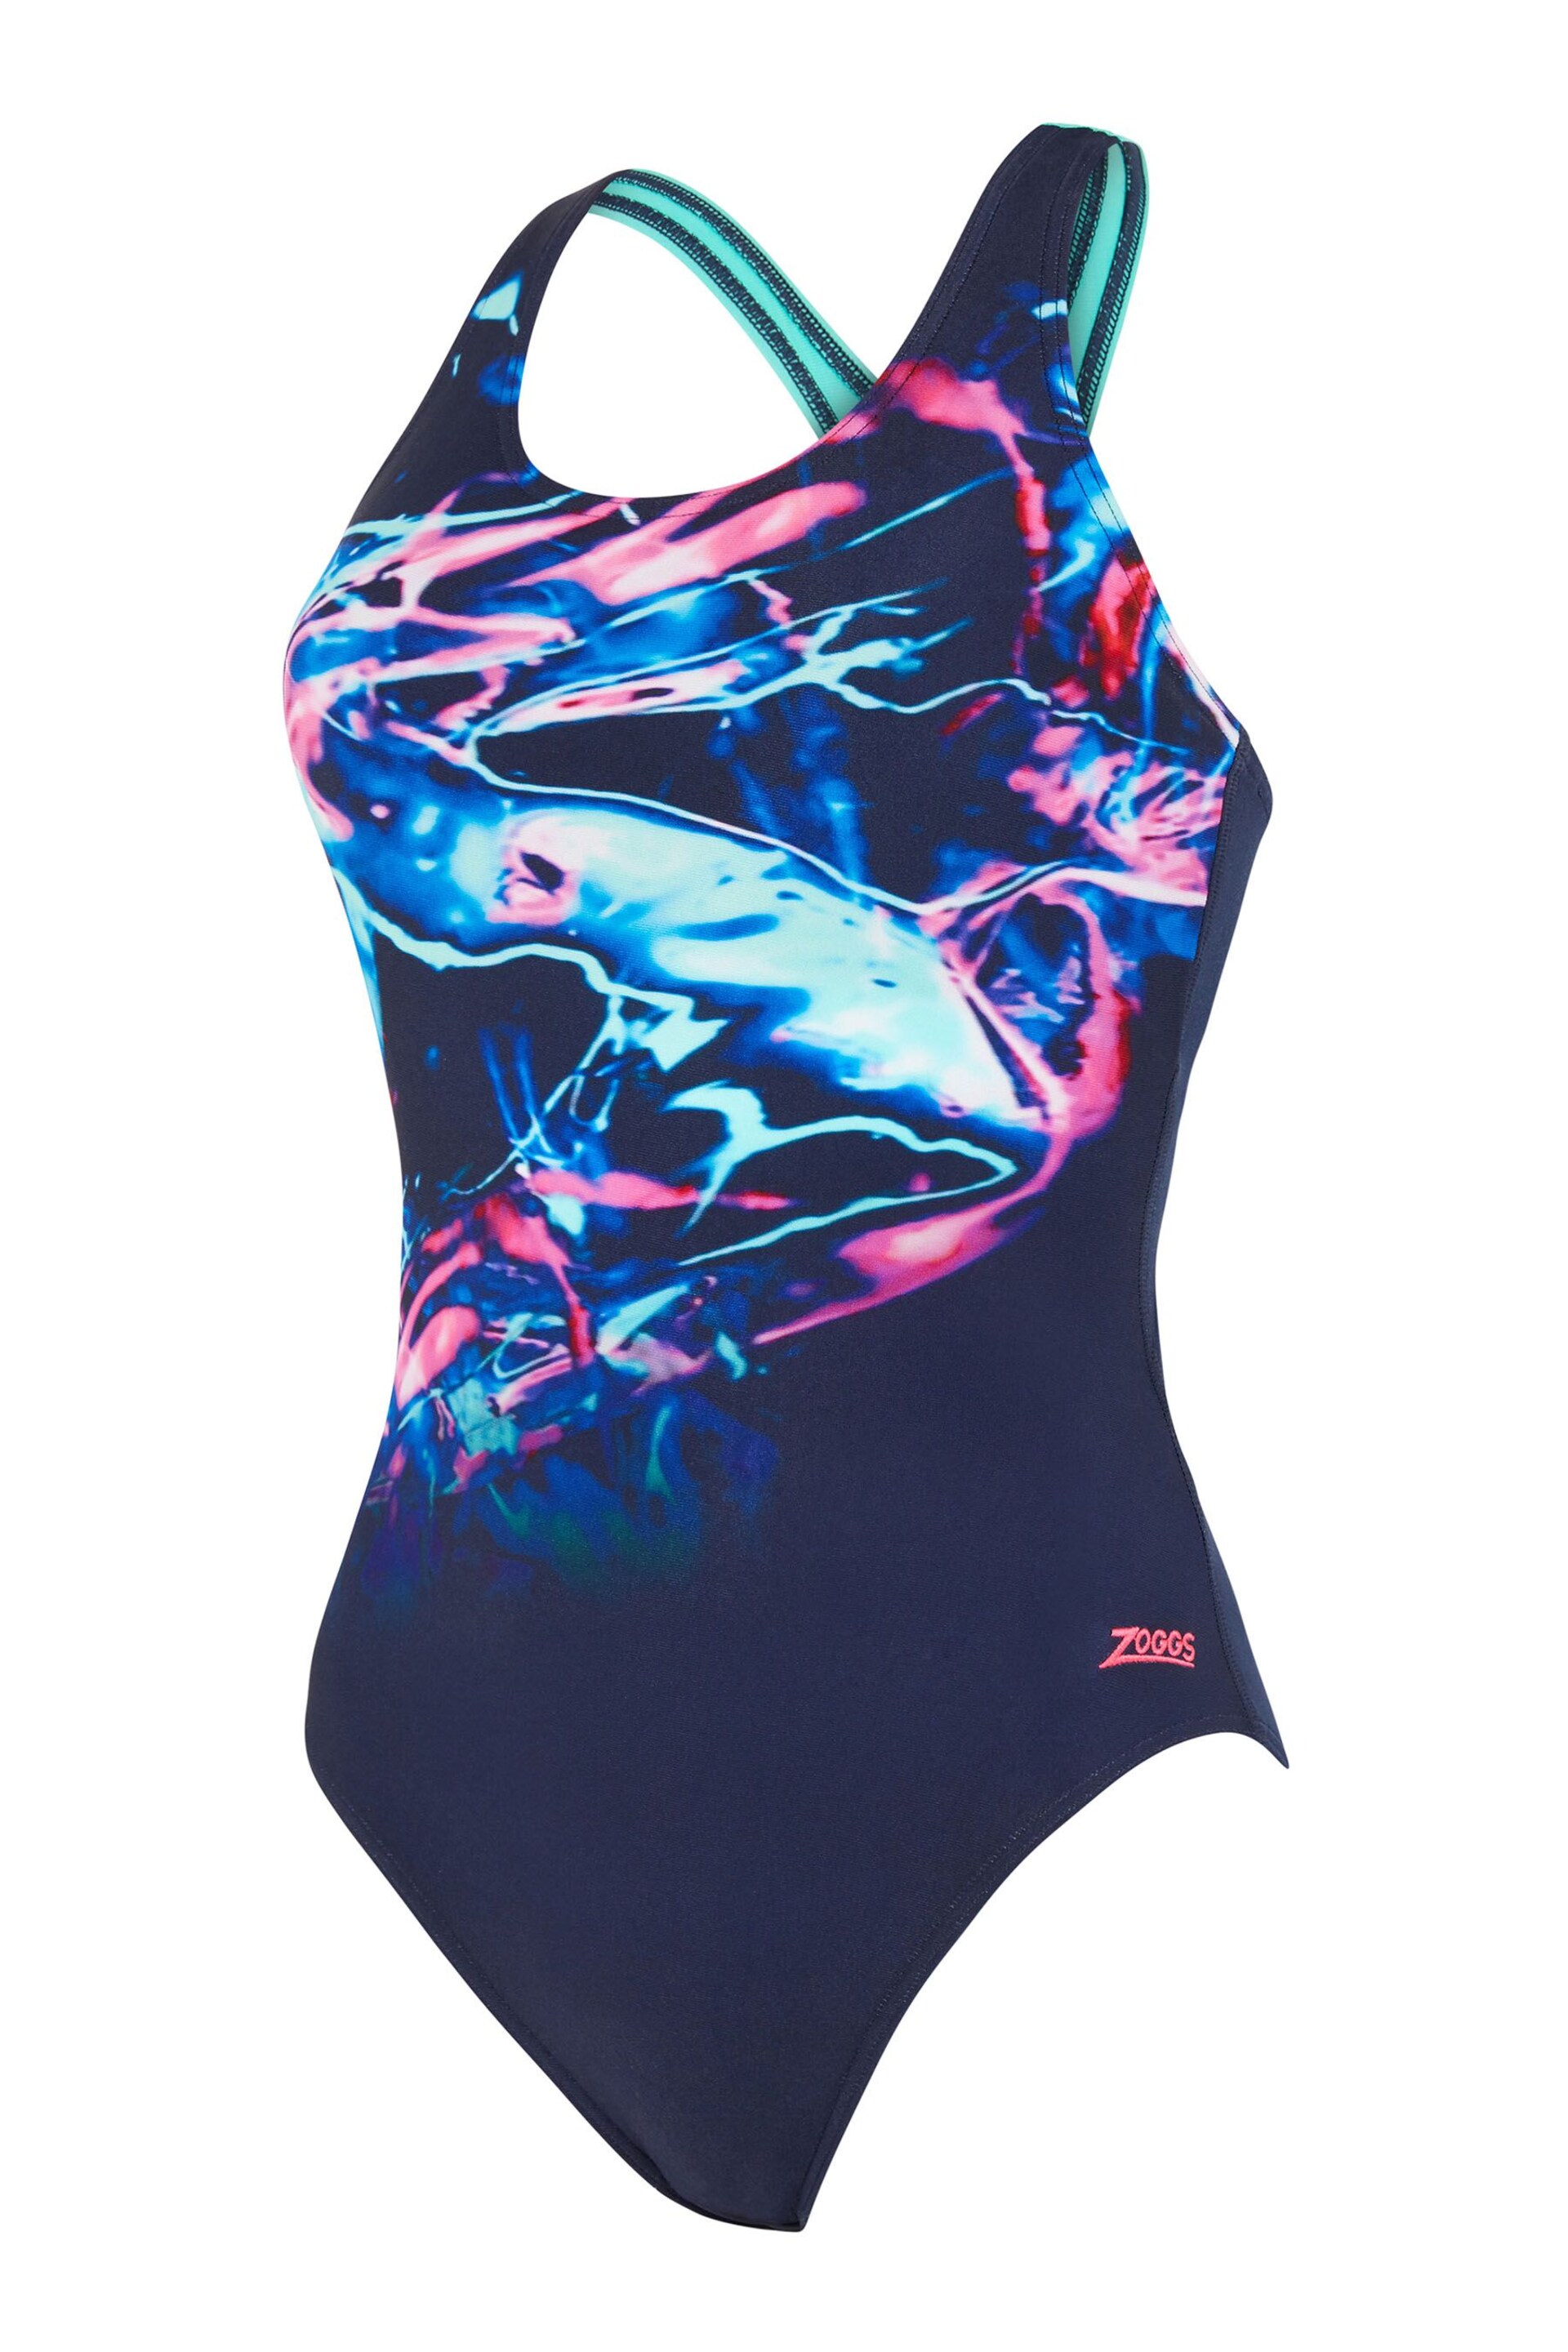 Zoggs Actionback Supportive One Piece Swimsuit - Image 7 of 8